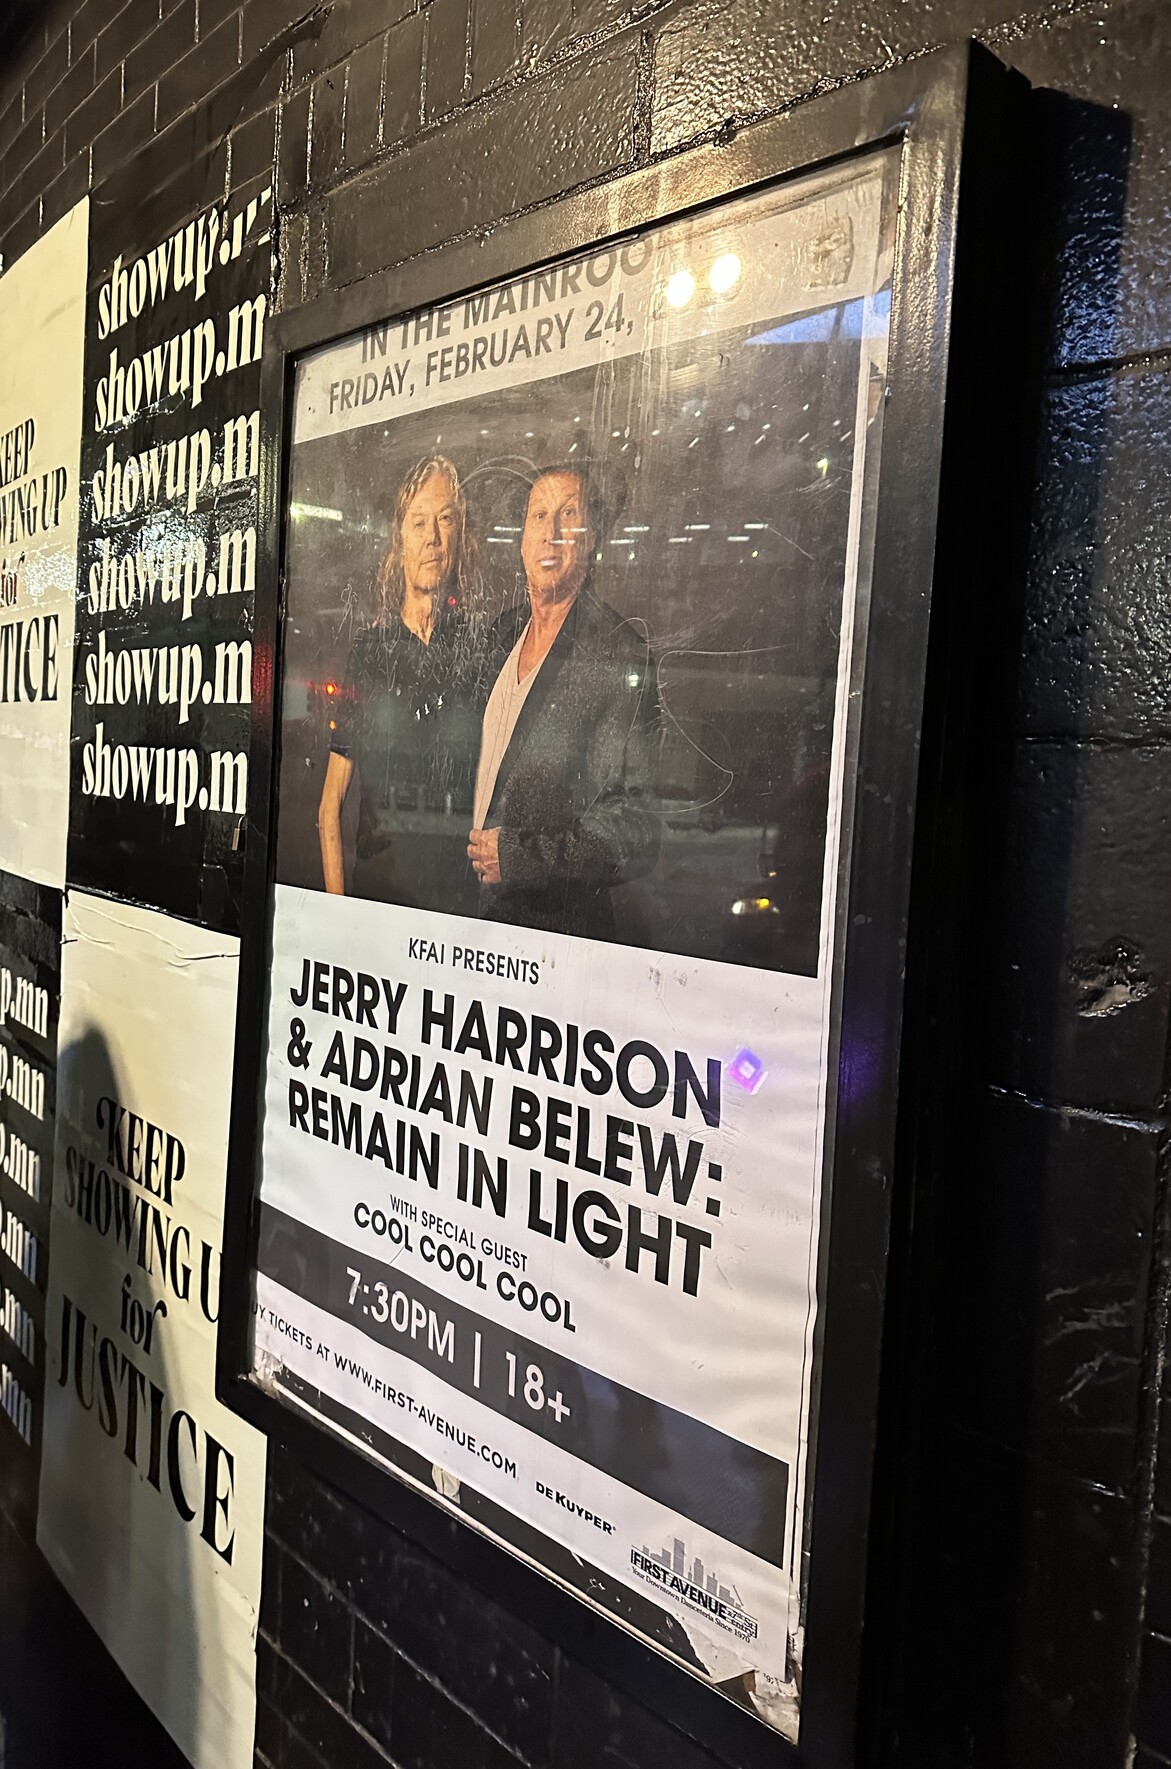 Jerry Harrison & Adrian Belew: Remain in Light poster hanging on the black wall outside the entrance to First Avenue